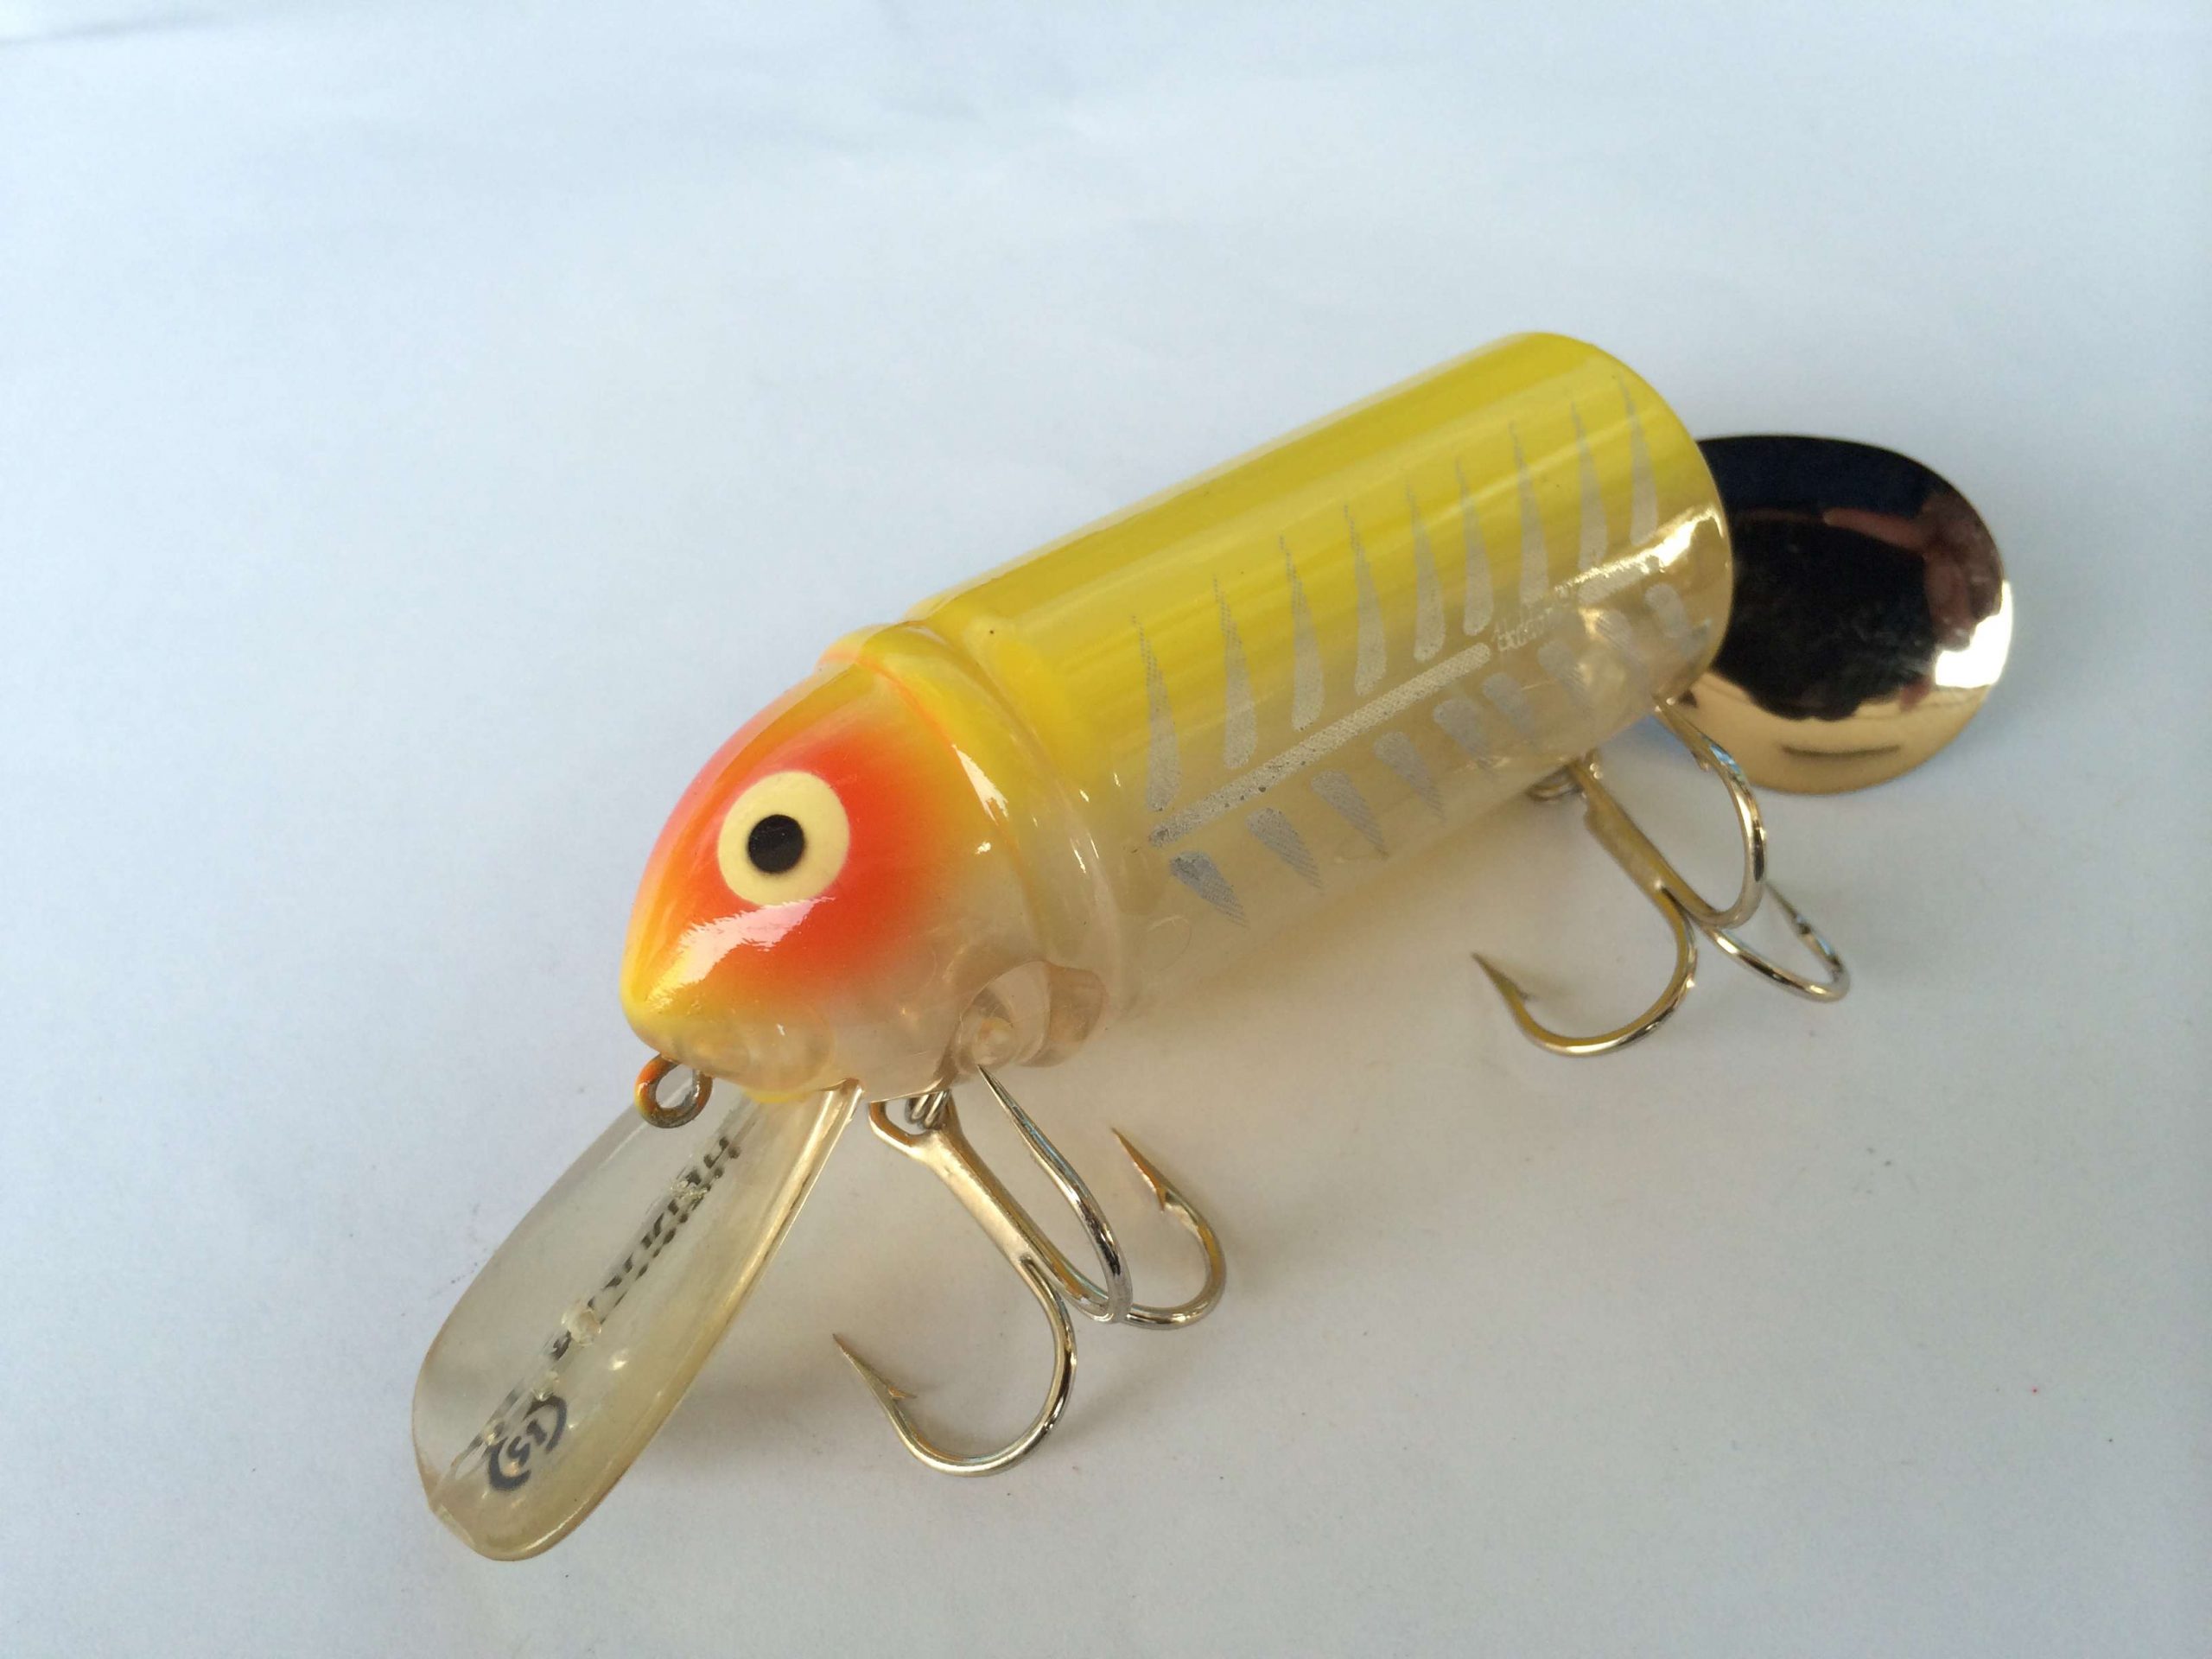 This is more of a traditional Heddon color.